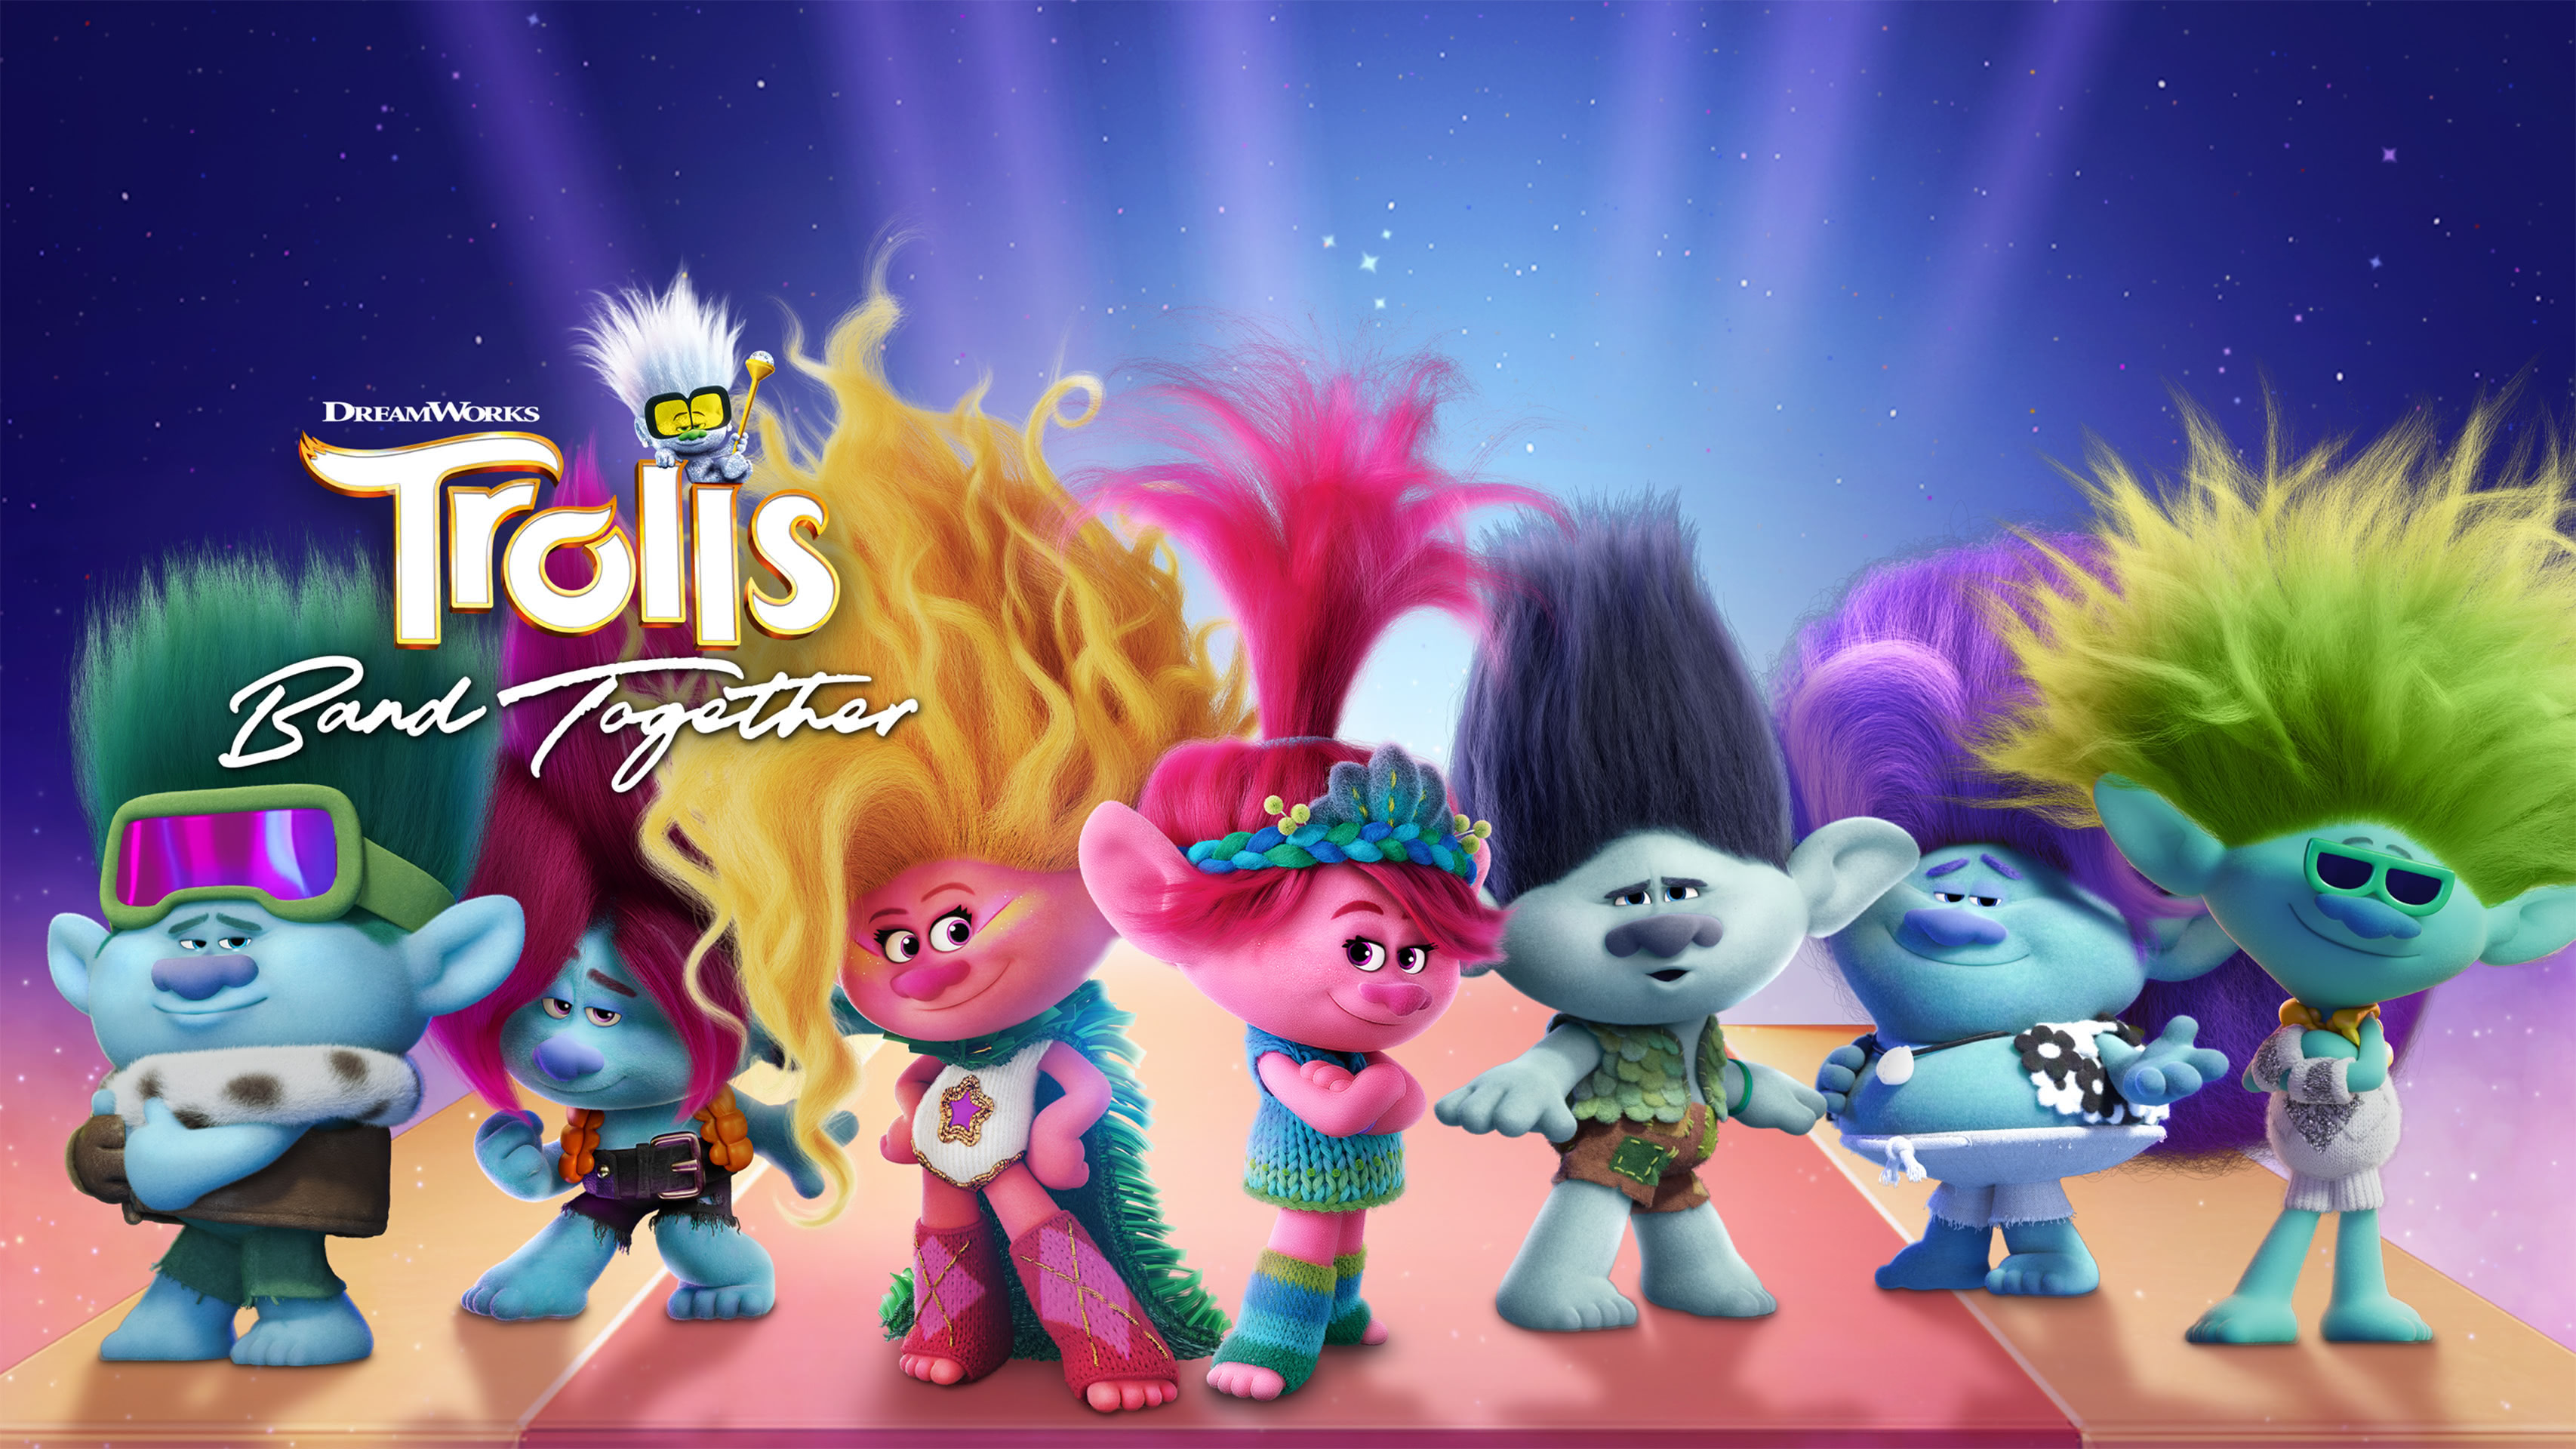 Win 'Trolls Band Together' 4K Digital Download – Join Poppy and Branch ...